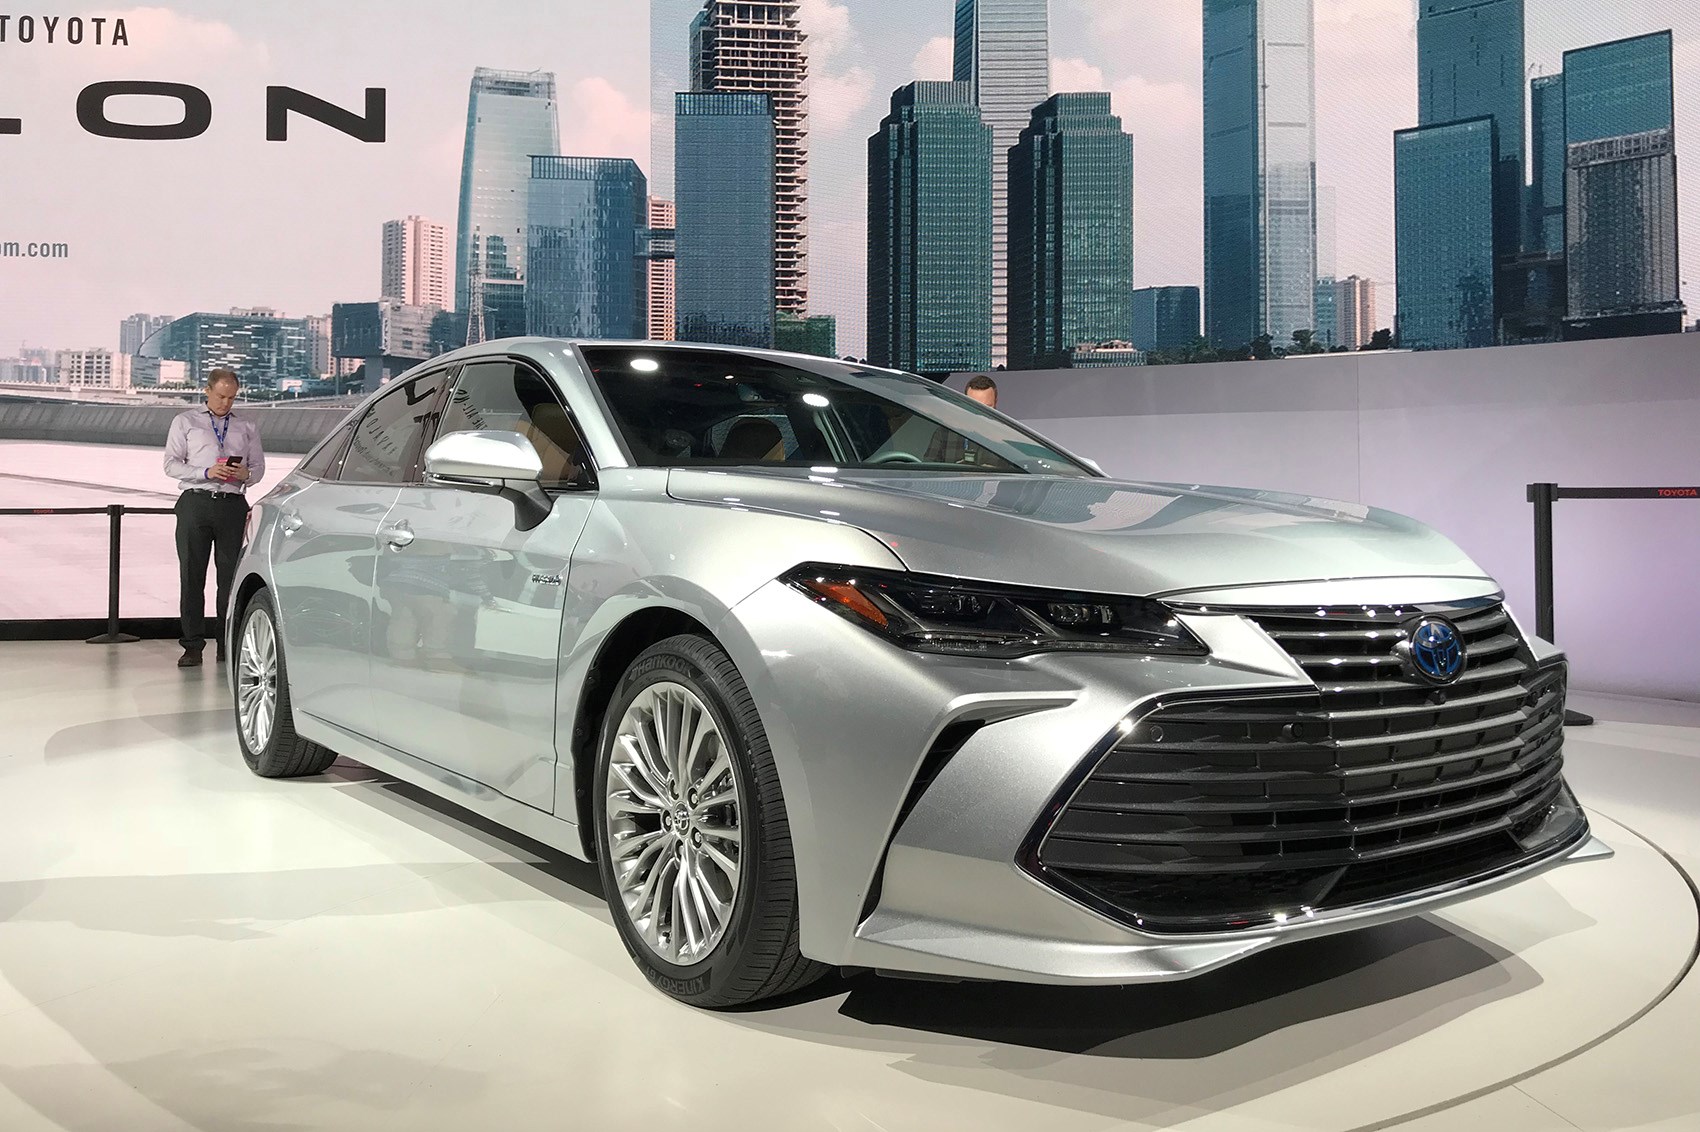 Toyota Avalon 2019 Cost | 2018 Cars Models